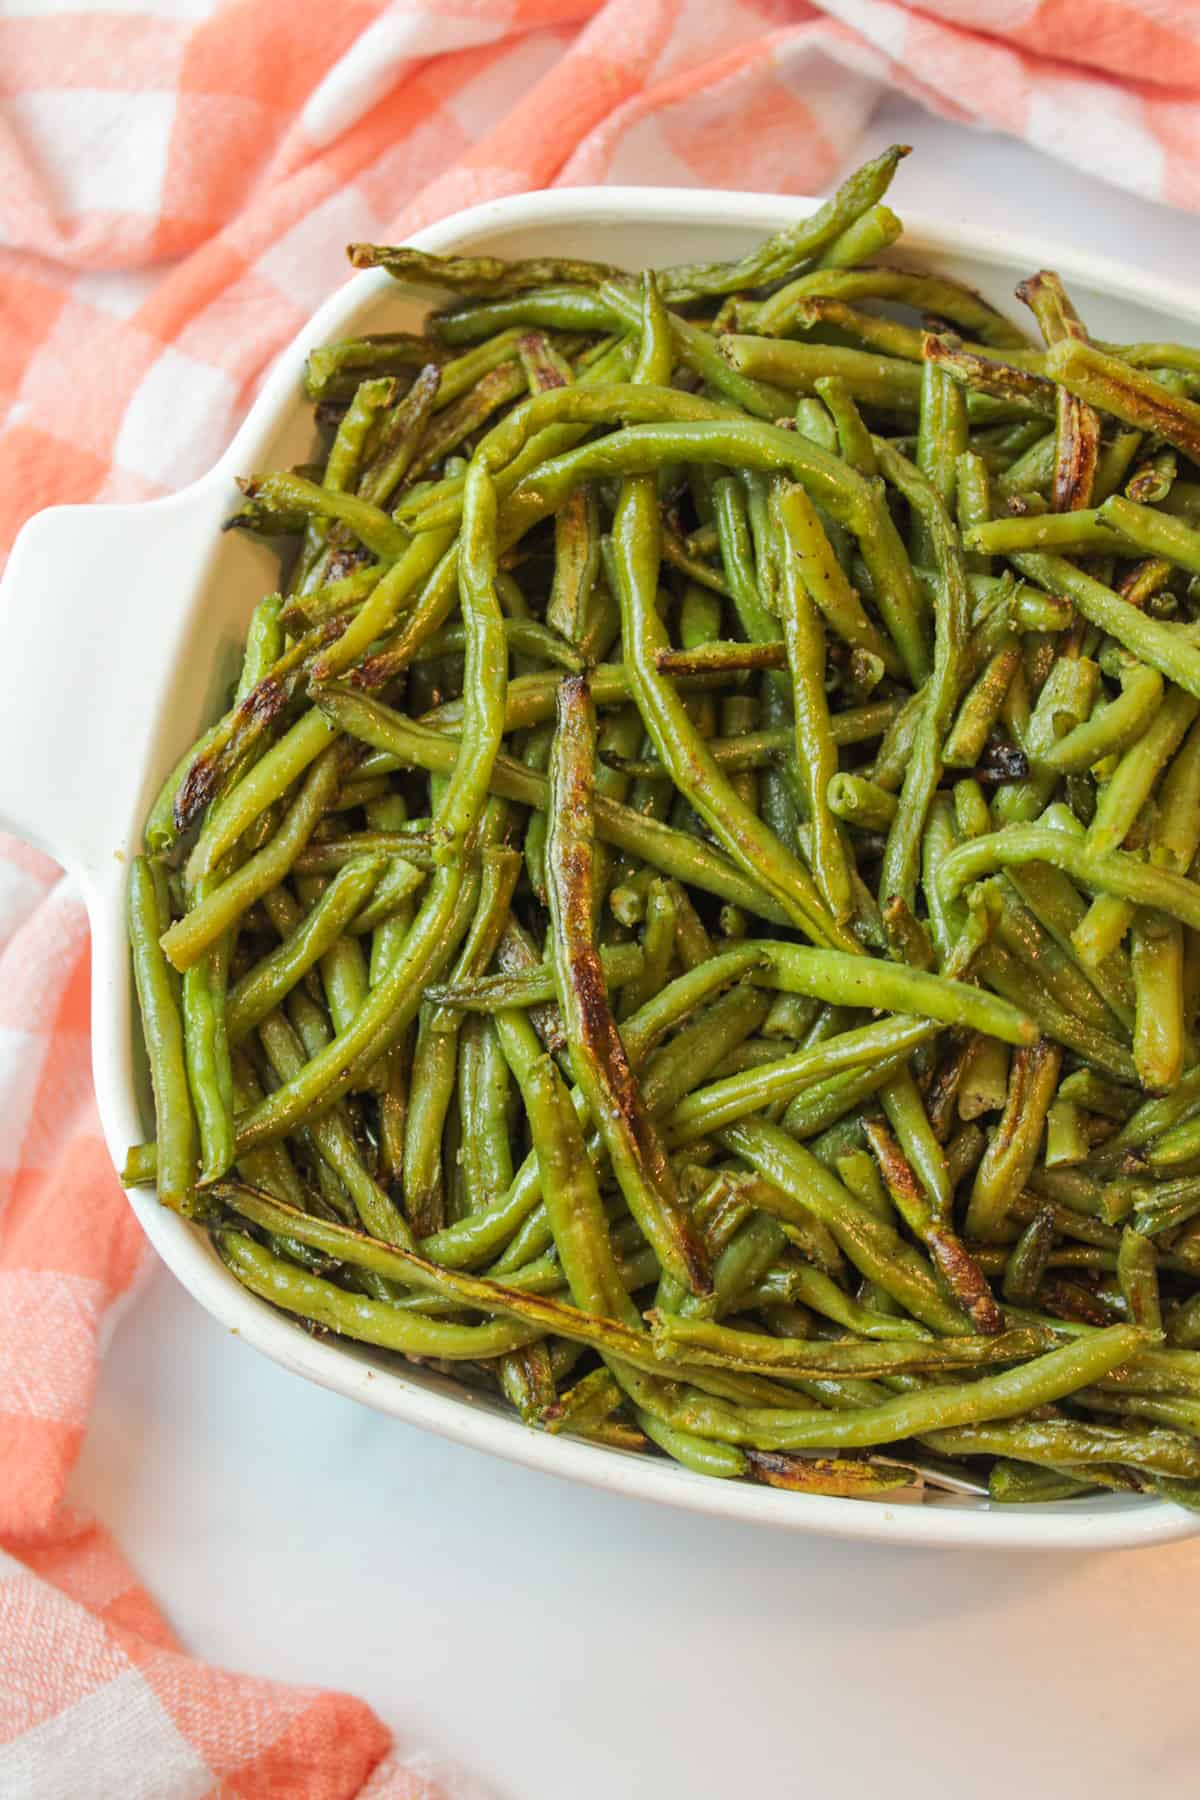 angled baking dish filled with roasted green beans.